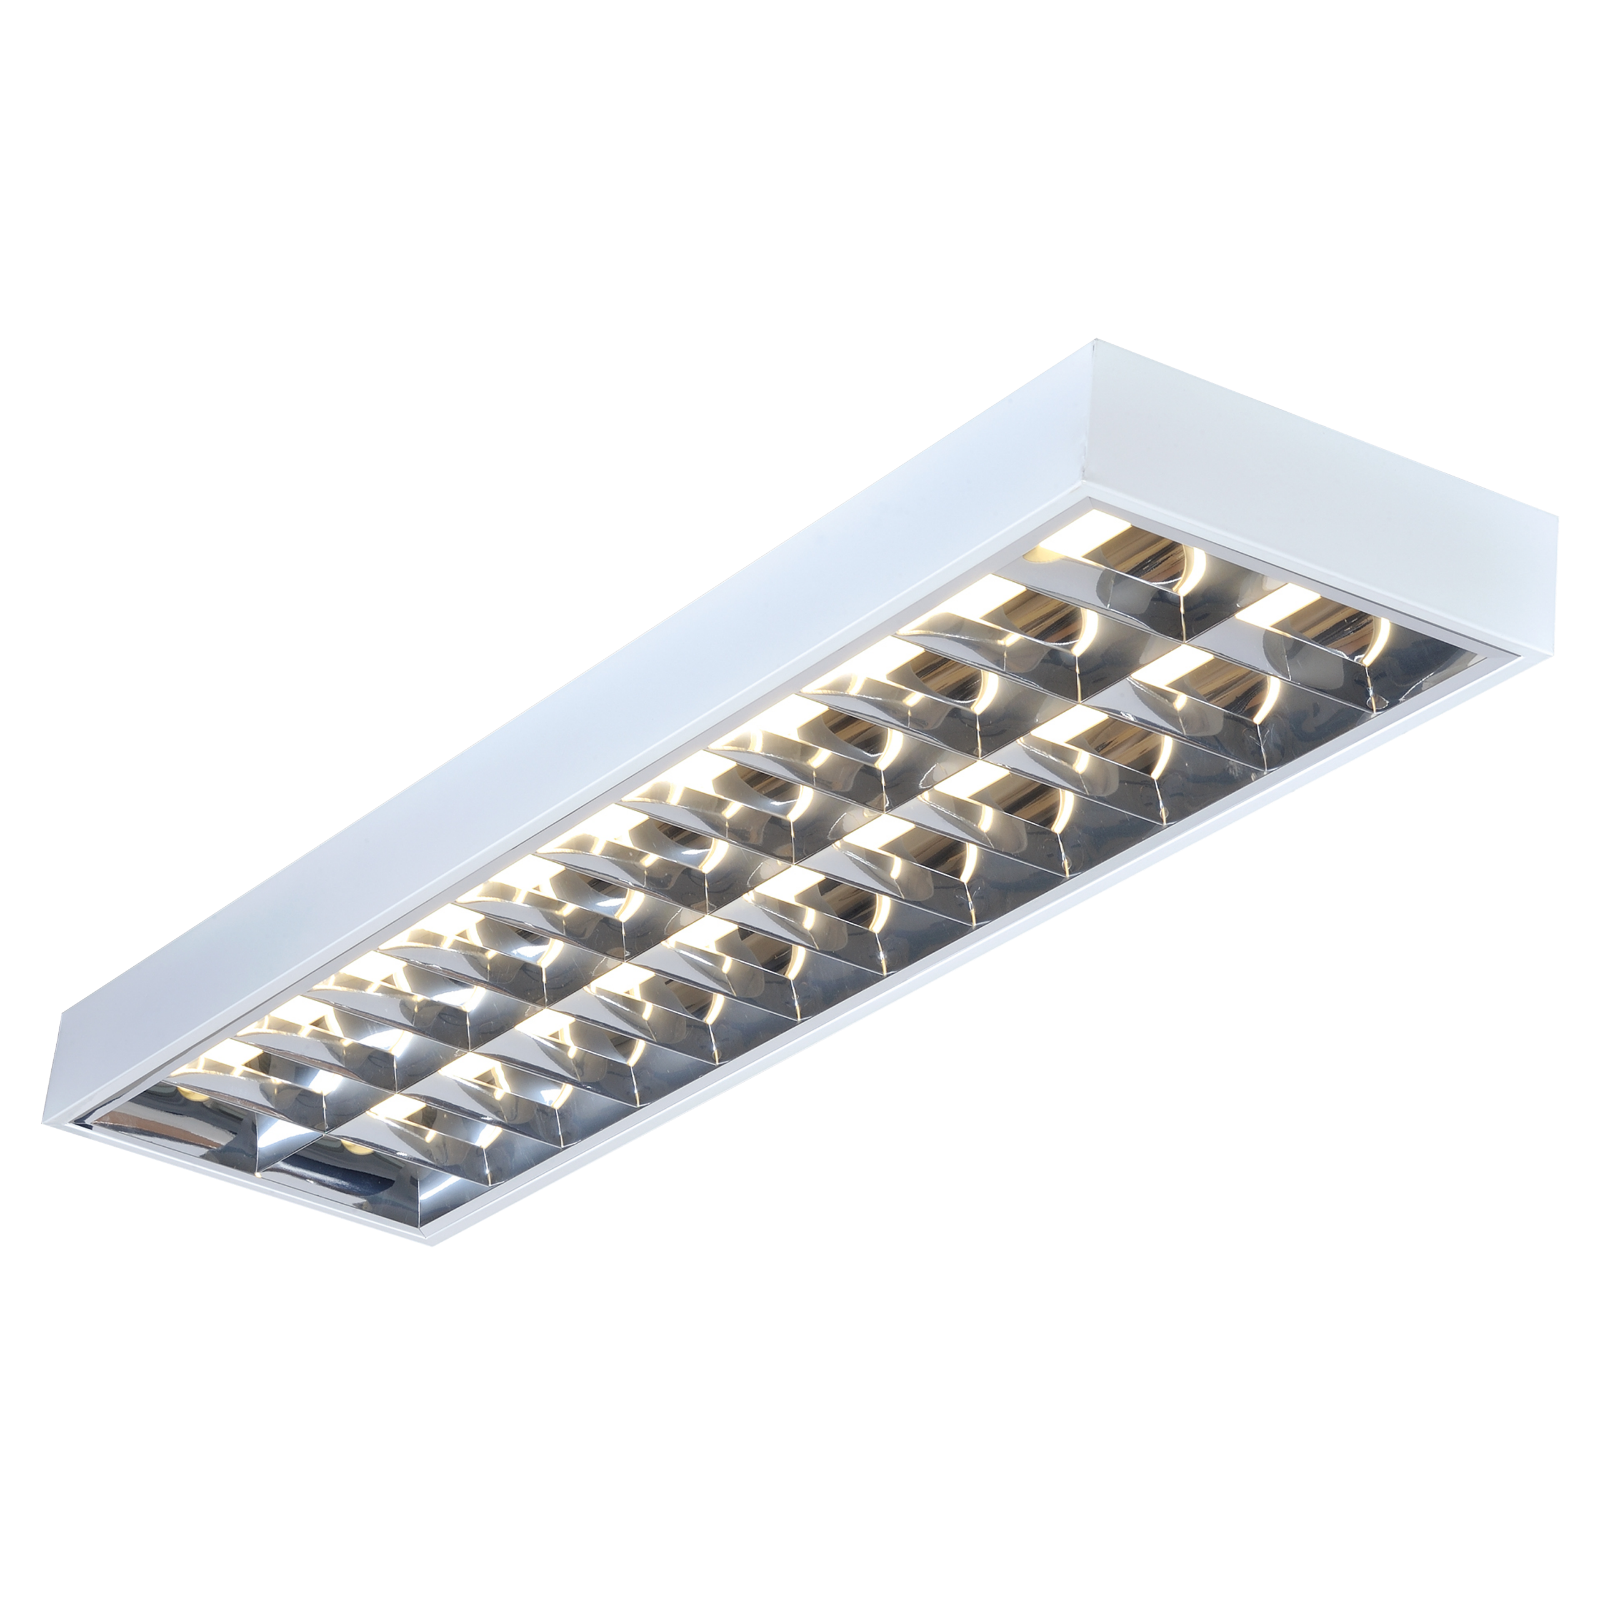 IP20 2x36W 4ft T8 Surface Mounted Emergency Fluorescent Fitting 1220x304x80mm - SURF236EMHF 